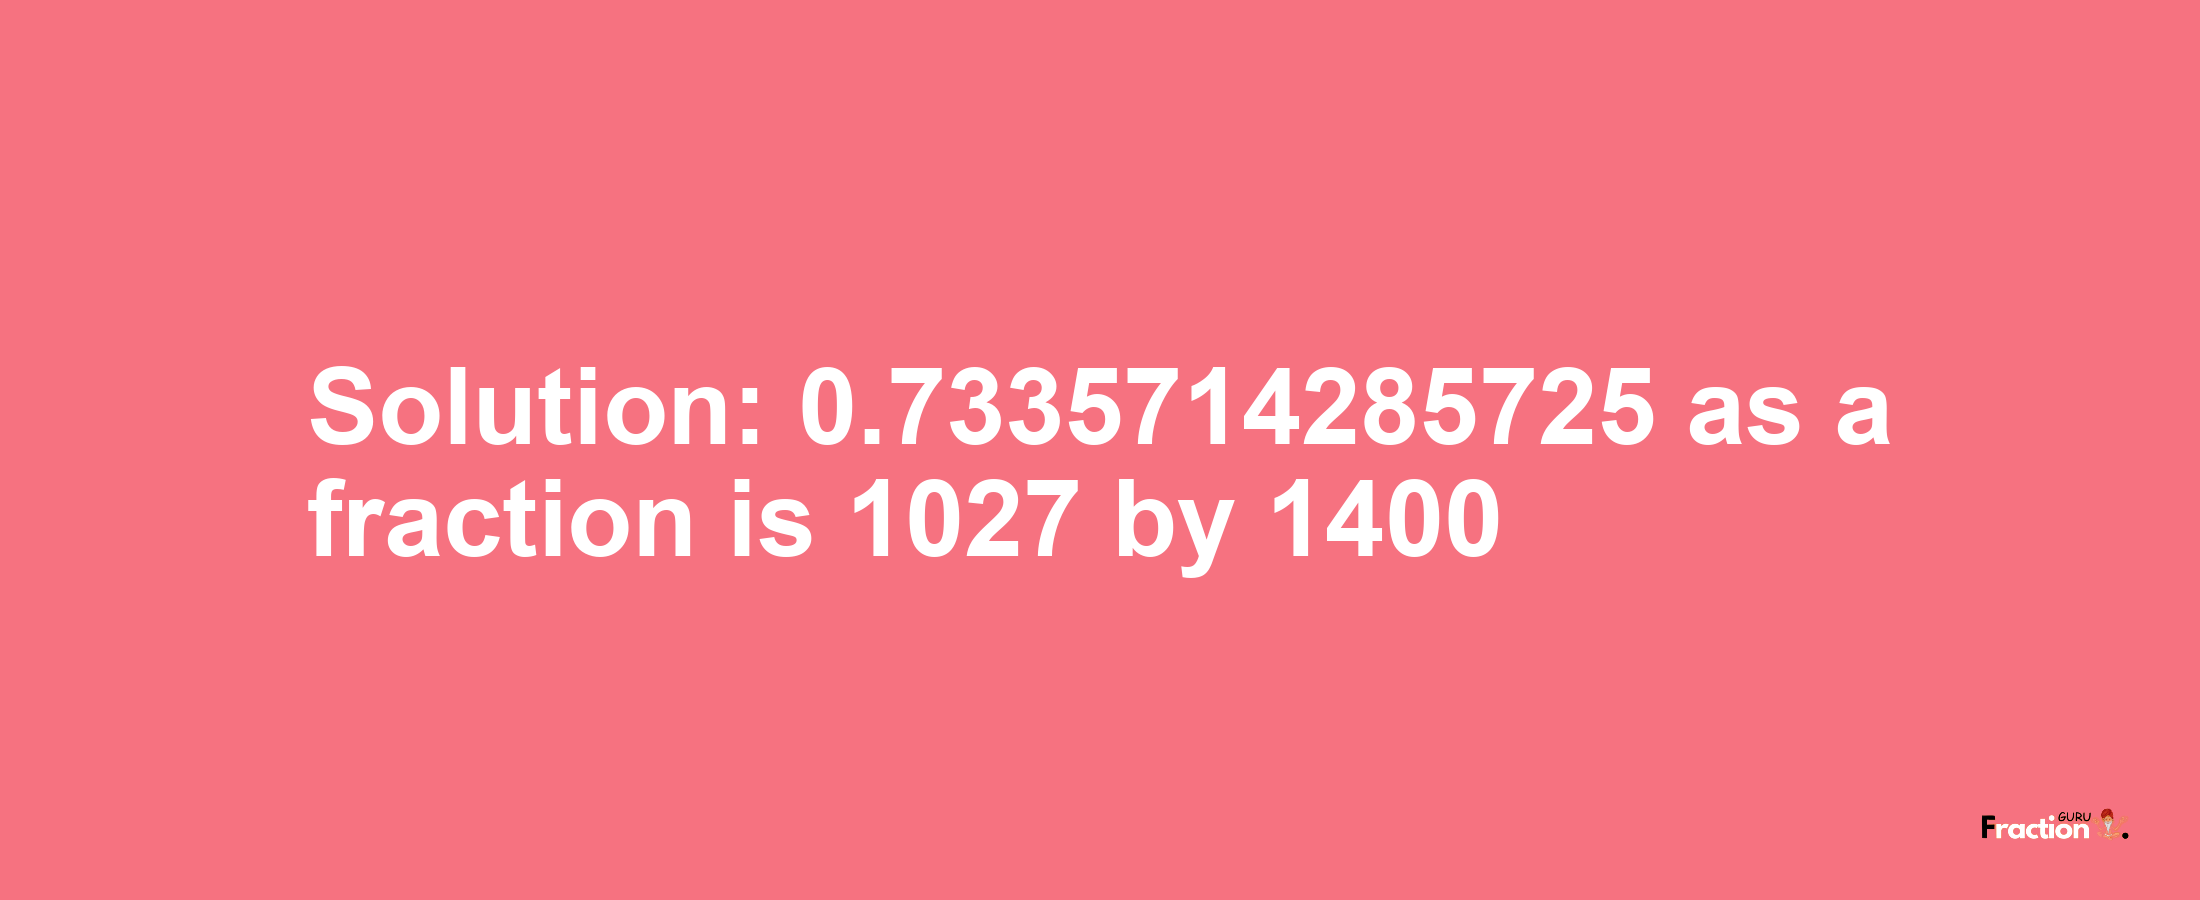 Solution:0.7335714285725 as a fraction is 1027/1400